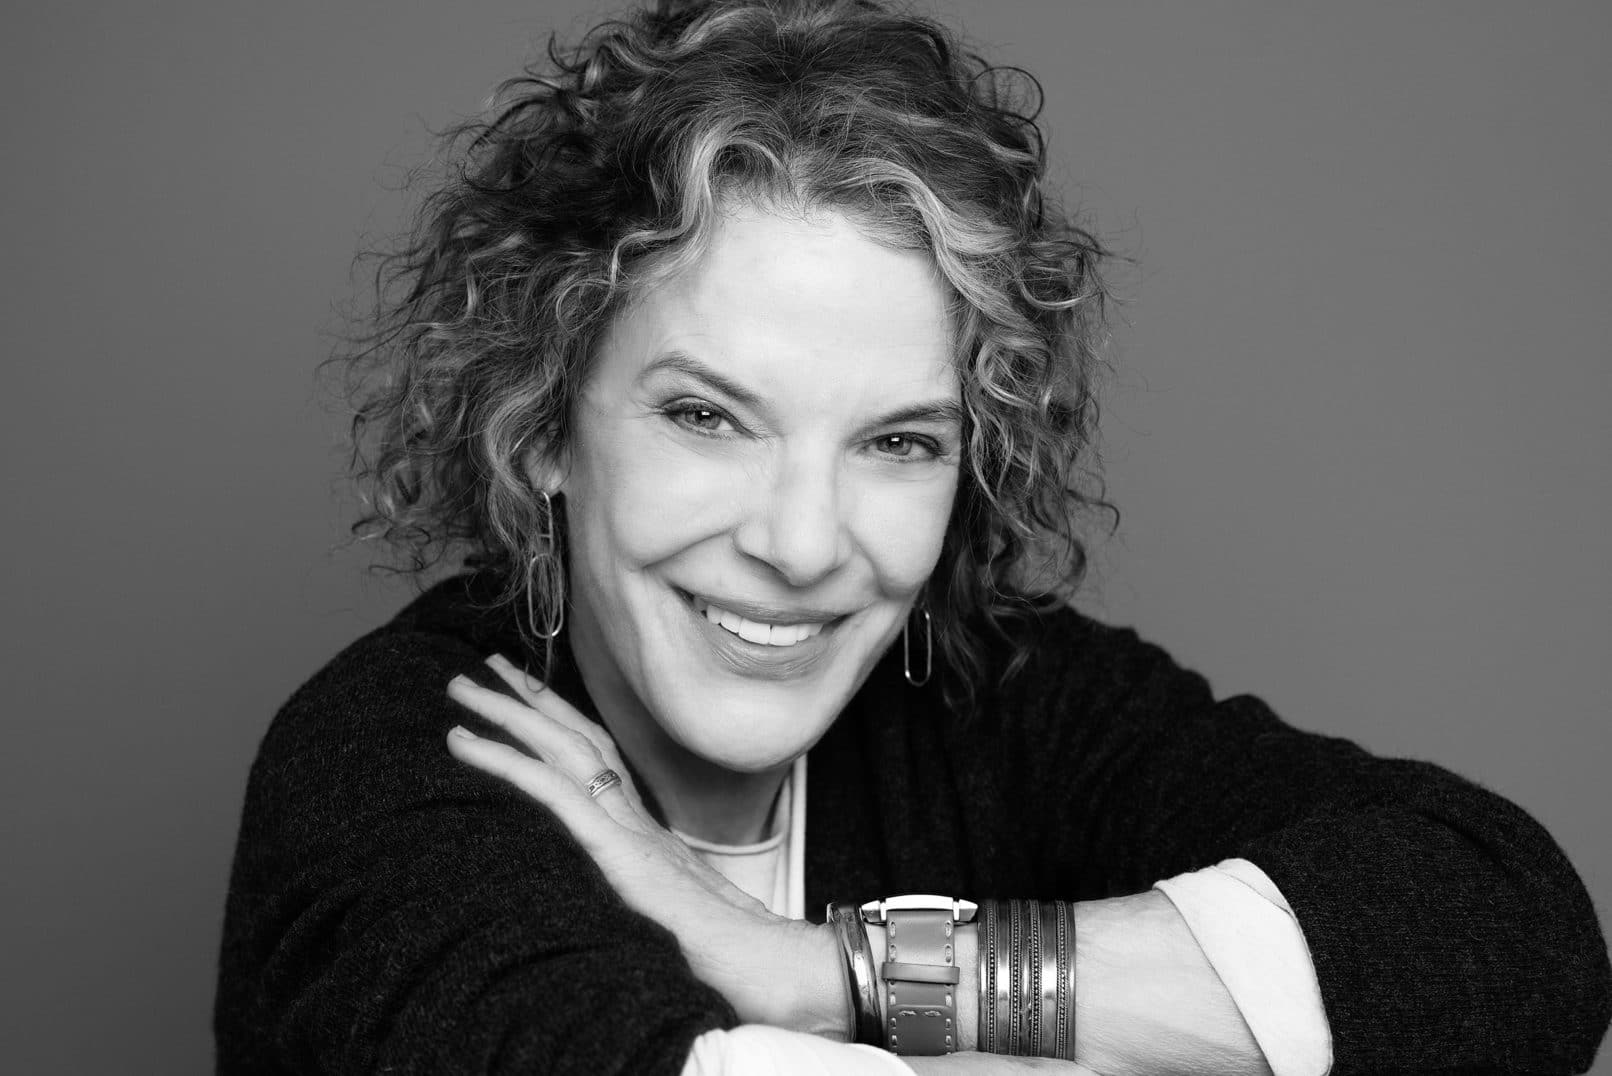 black and white photo of a middle aged woman with curly hair looking at the camera.